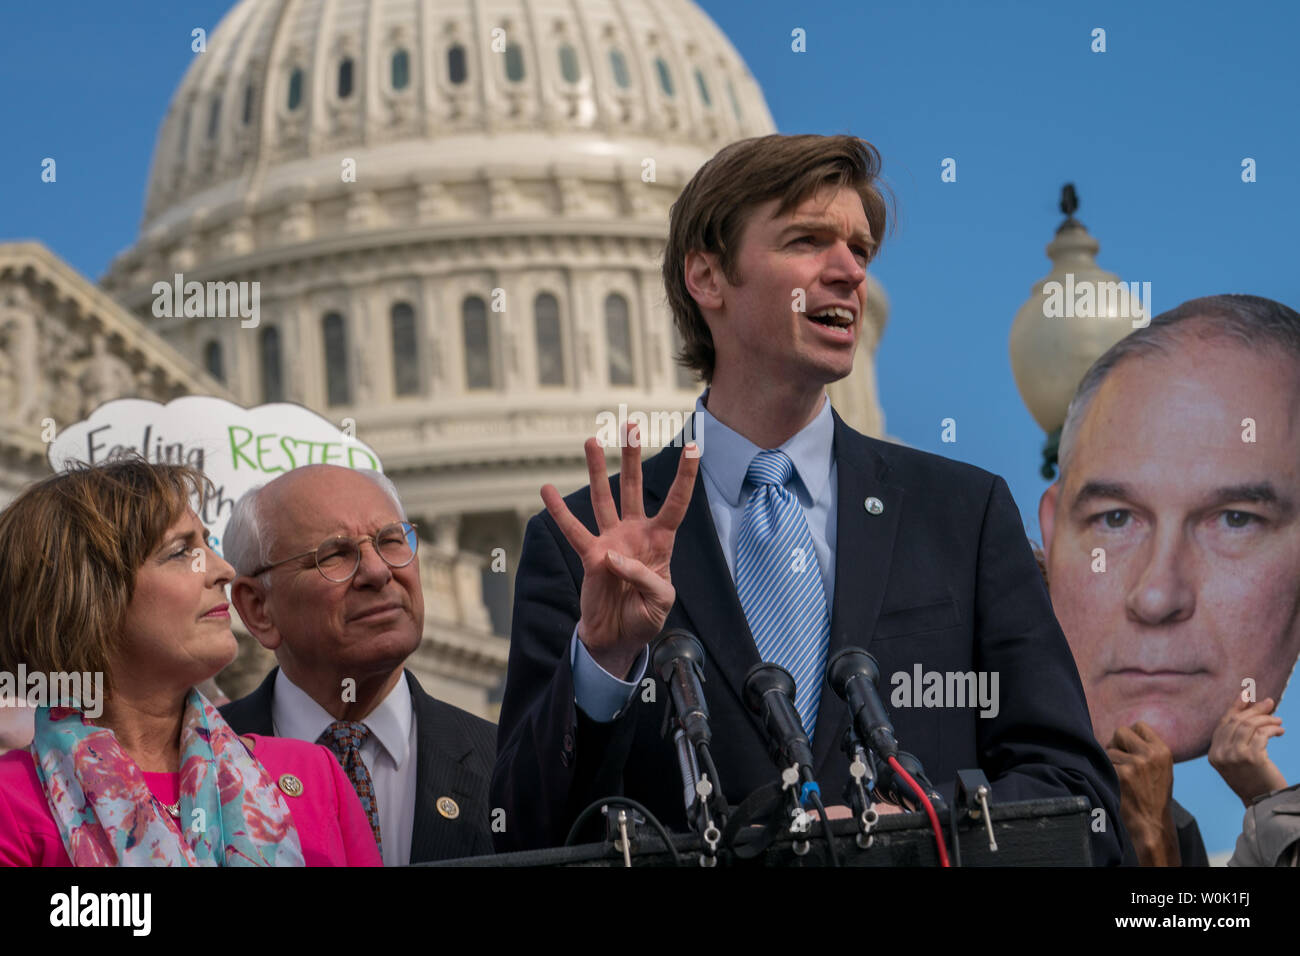 Collin OÕMara, president and CEO of the National Wildlife Federation, center, and democrats on the House Energy and Commerce Committee hold a news conference to call for the firing or resignation of Environmental Protection Agency (EPA) Administrator Scott Pruitt; and to discuss important issues he must address during his testimony before the Environment Subcommittee in Washington, D.C. on April 26, 2018.            Photo by Ken Cedeno/UPI Stock Photo